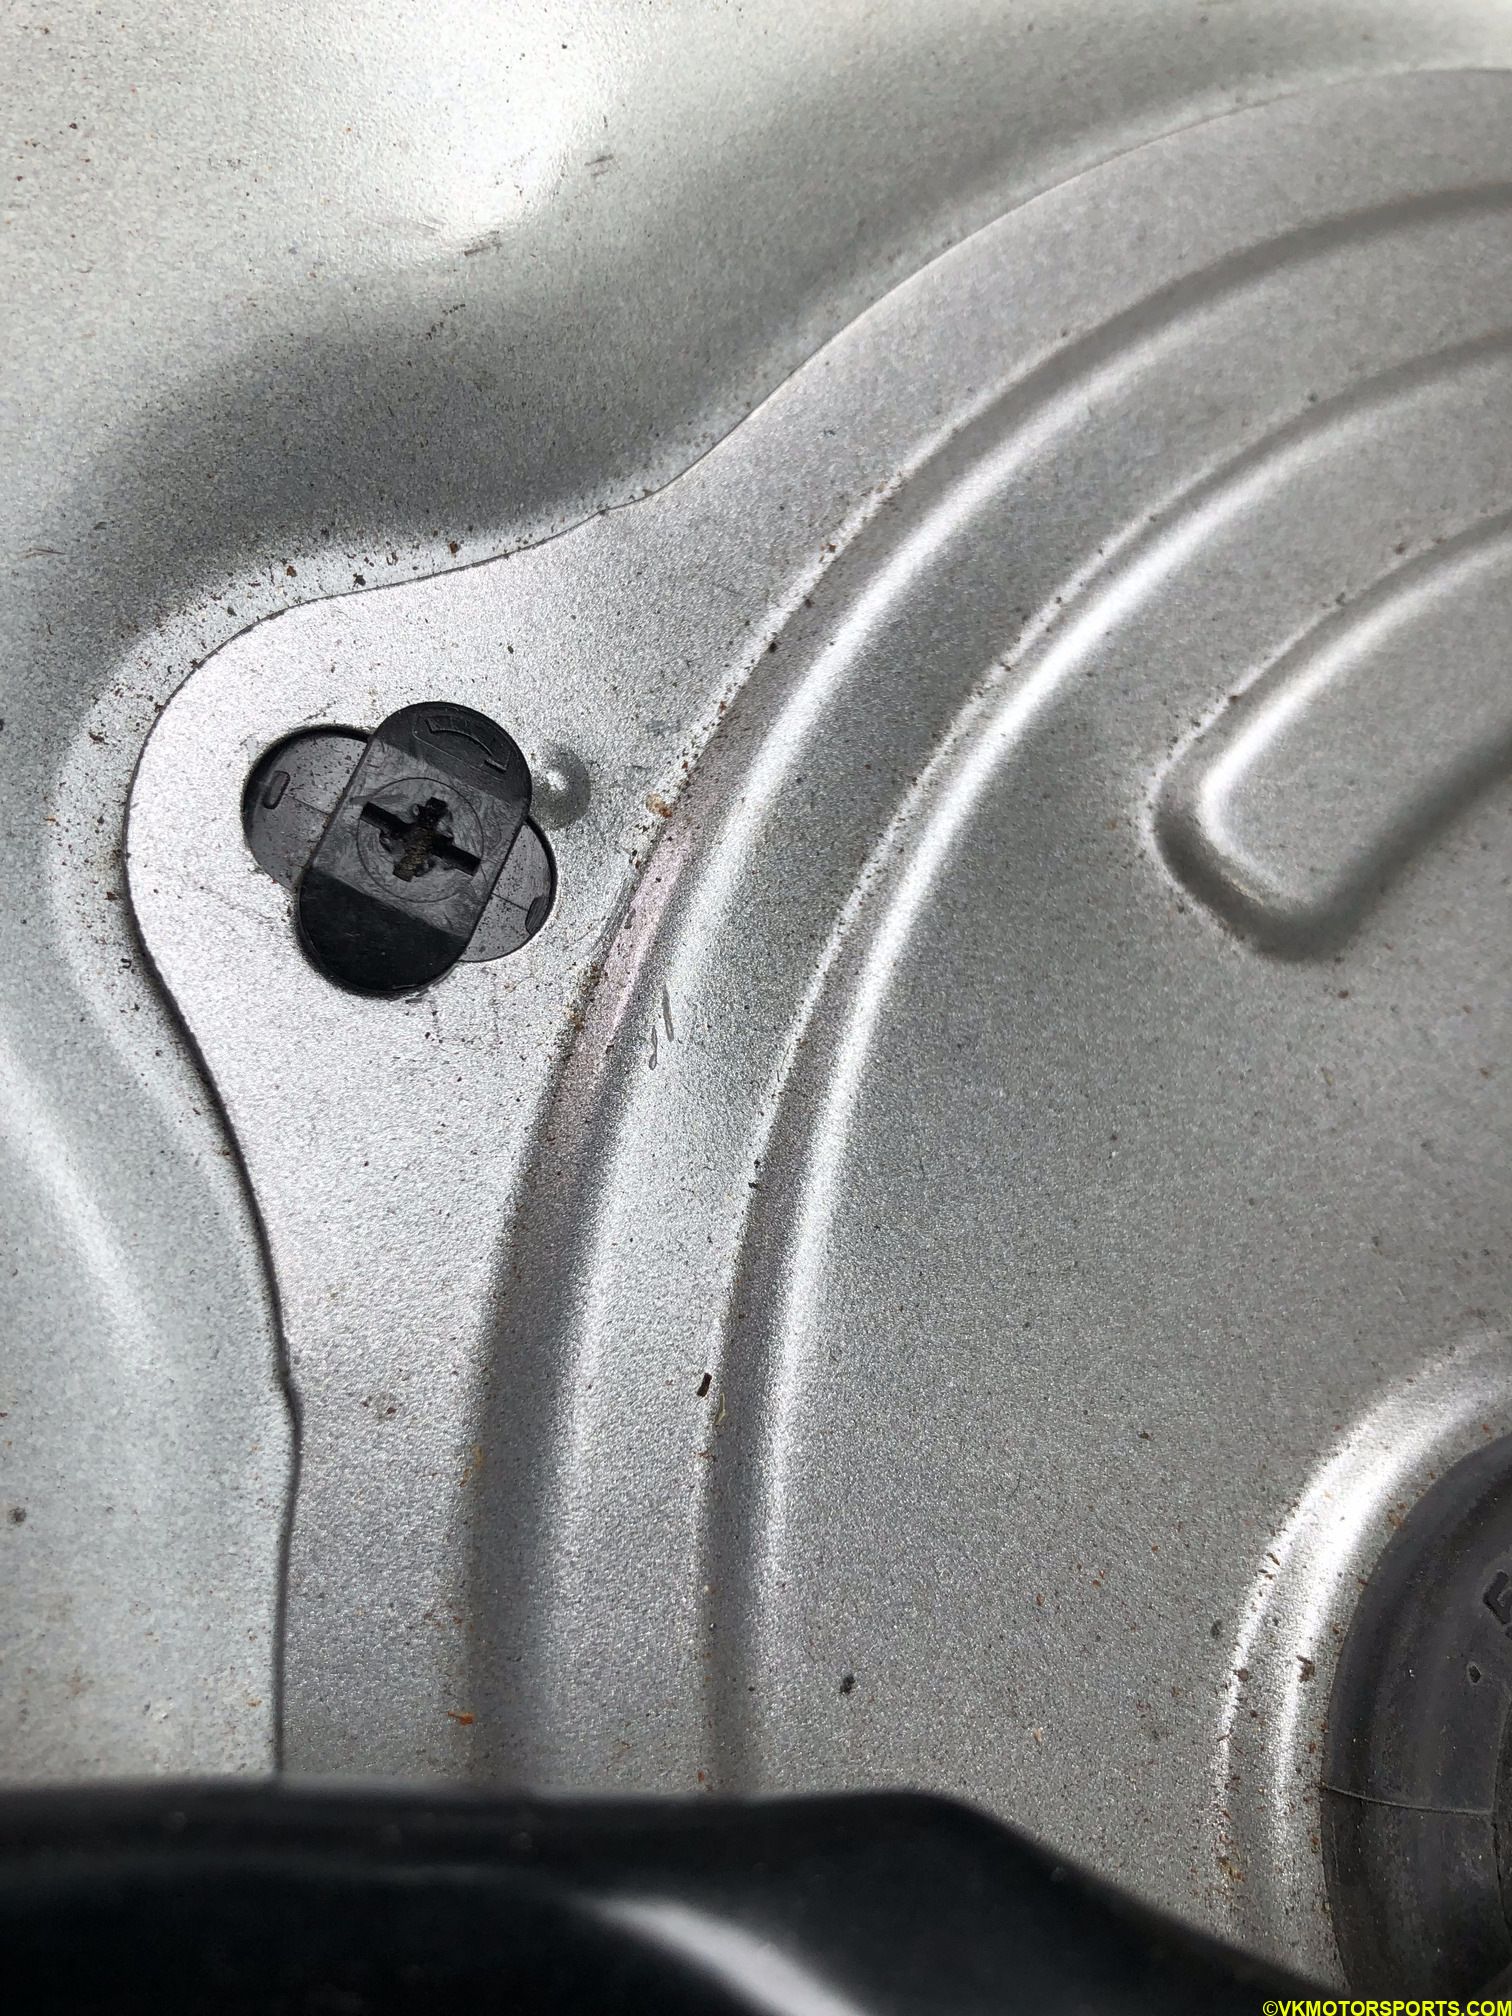 Figure 4. Closeup of outer cover screw